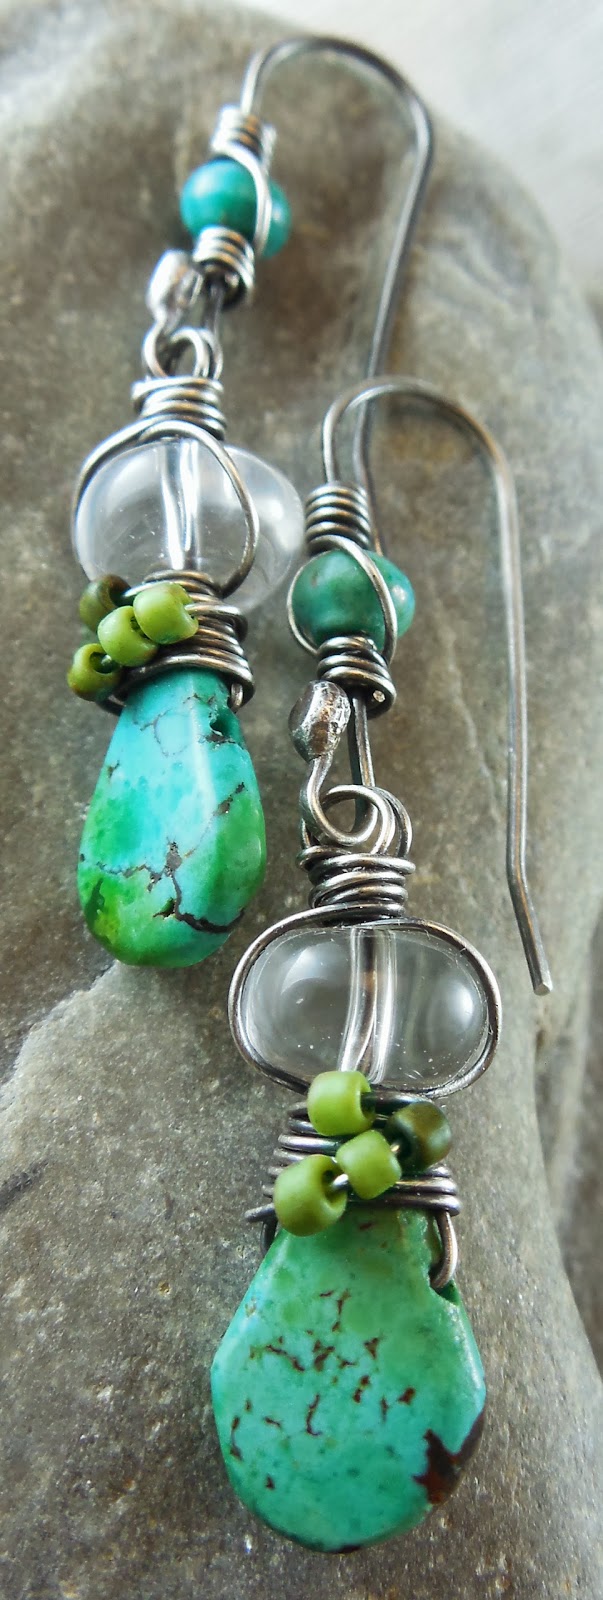 Earrings Everyday: Spring Thaw